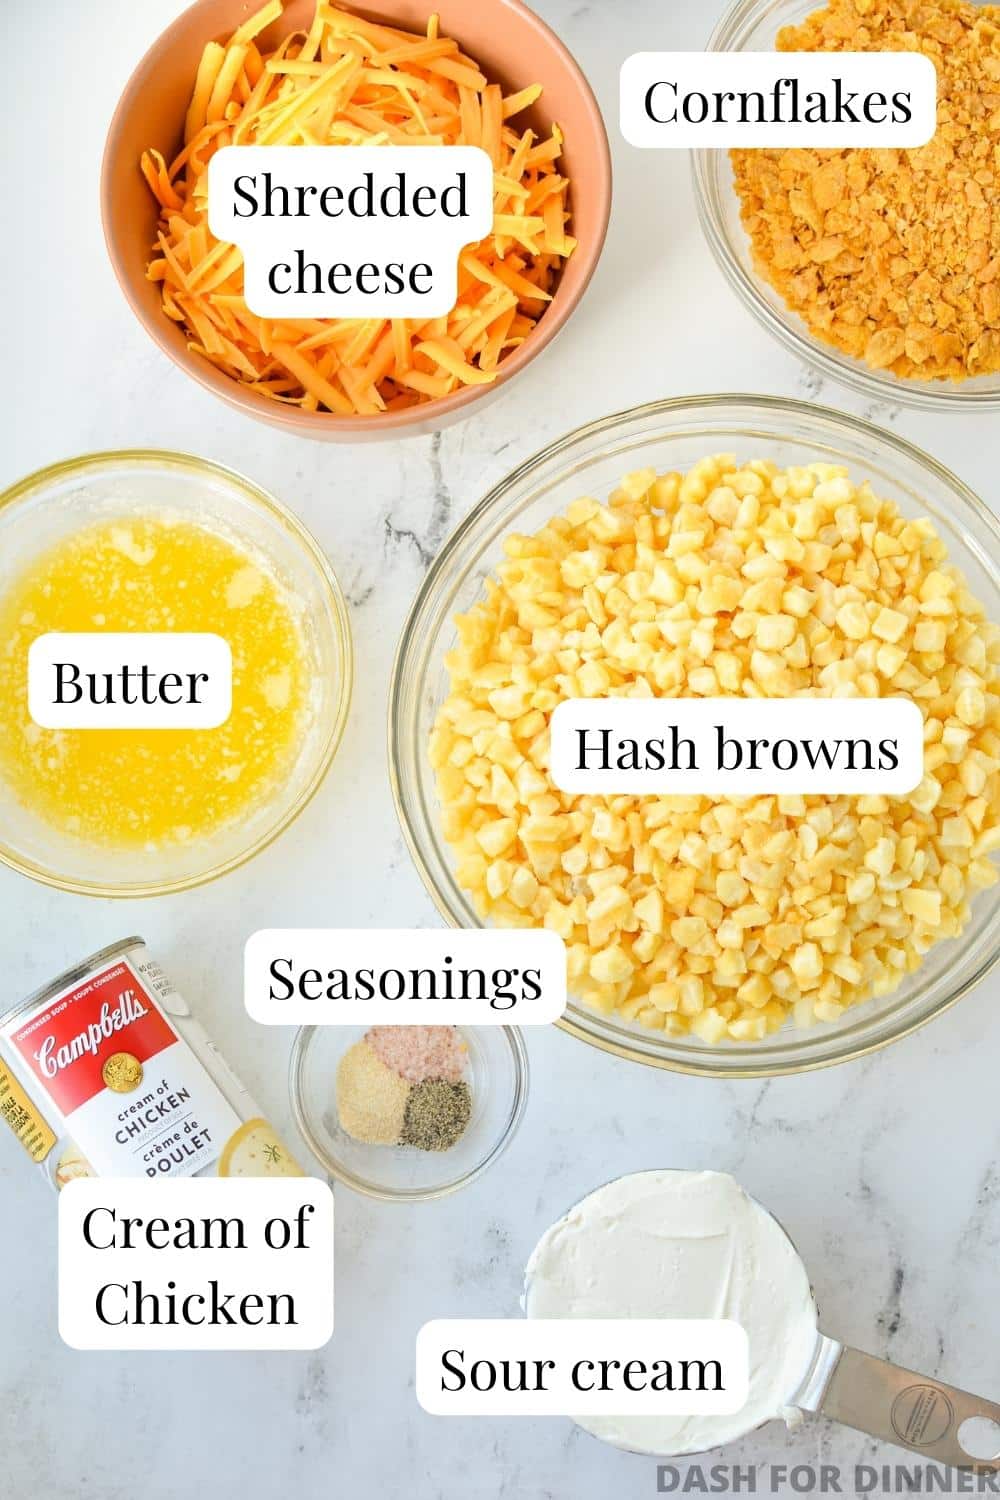 The ingredients needed to make hash brown casserole: hash browns, cheese, butter, etc.